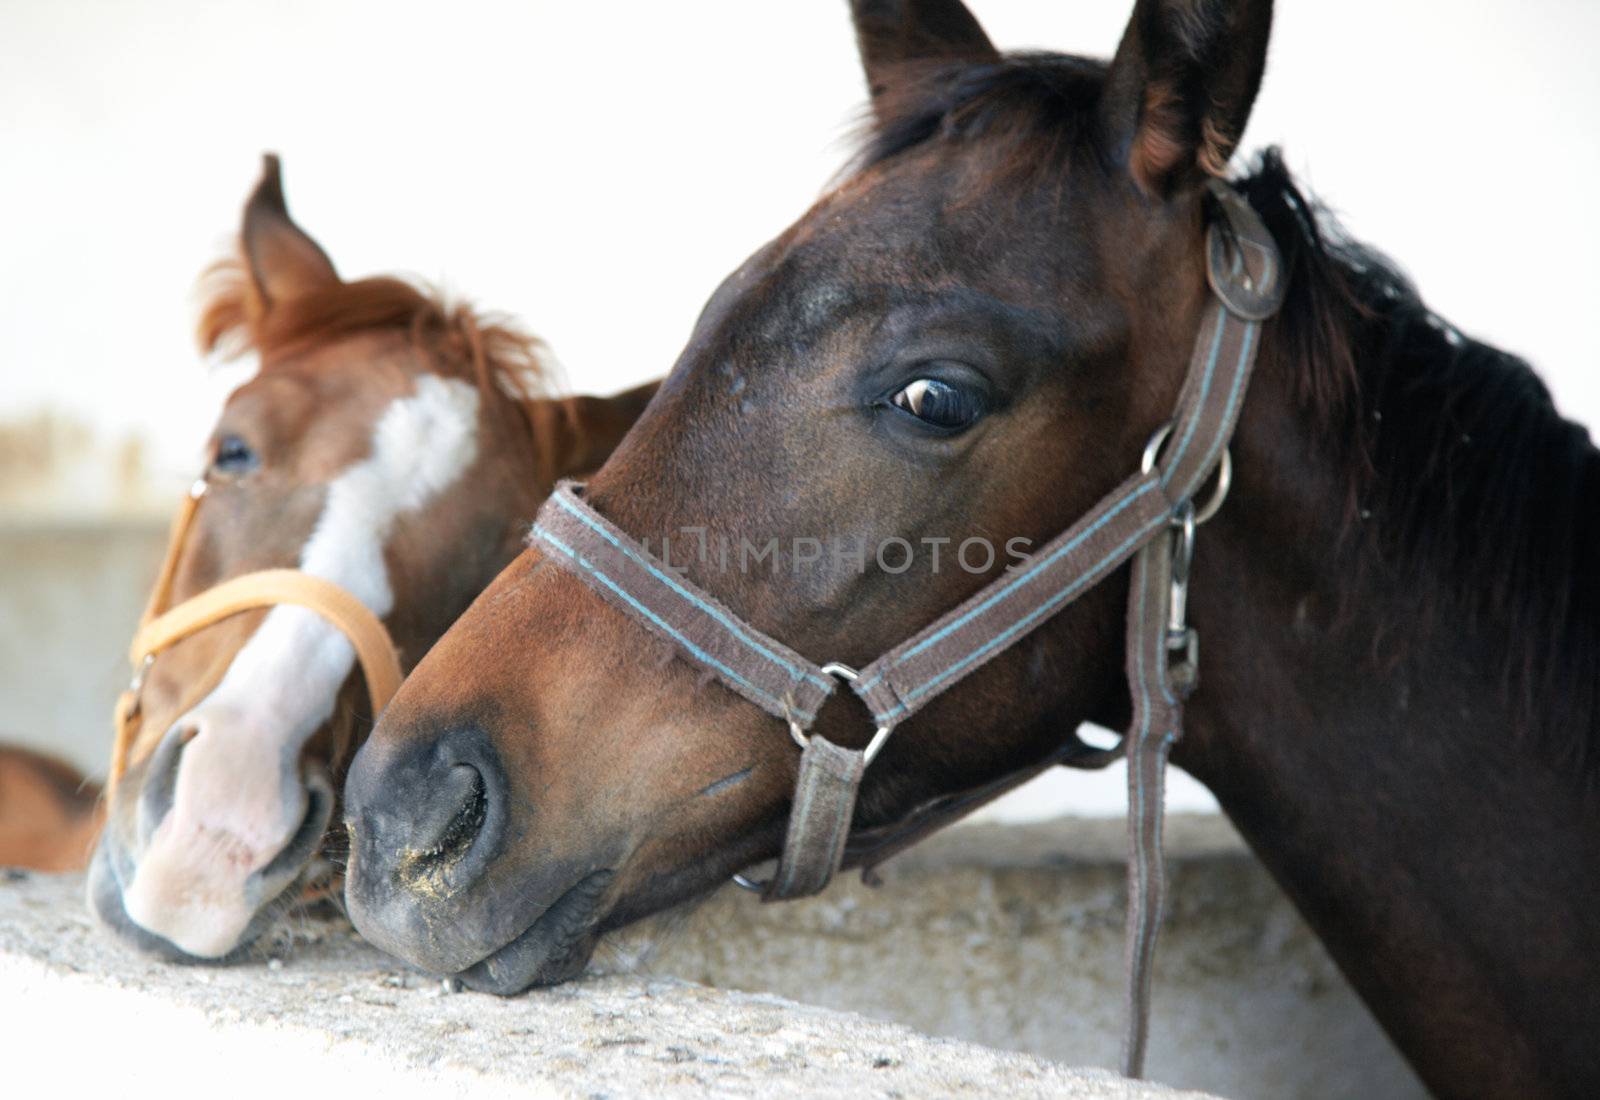 Two horses in love standing in the stable. Middle Asia. Natural light and colors